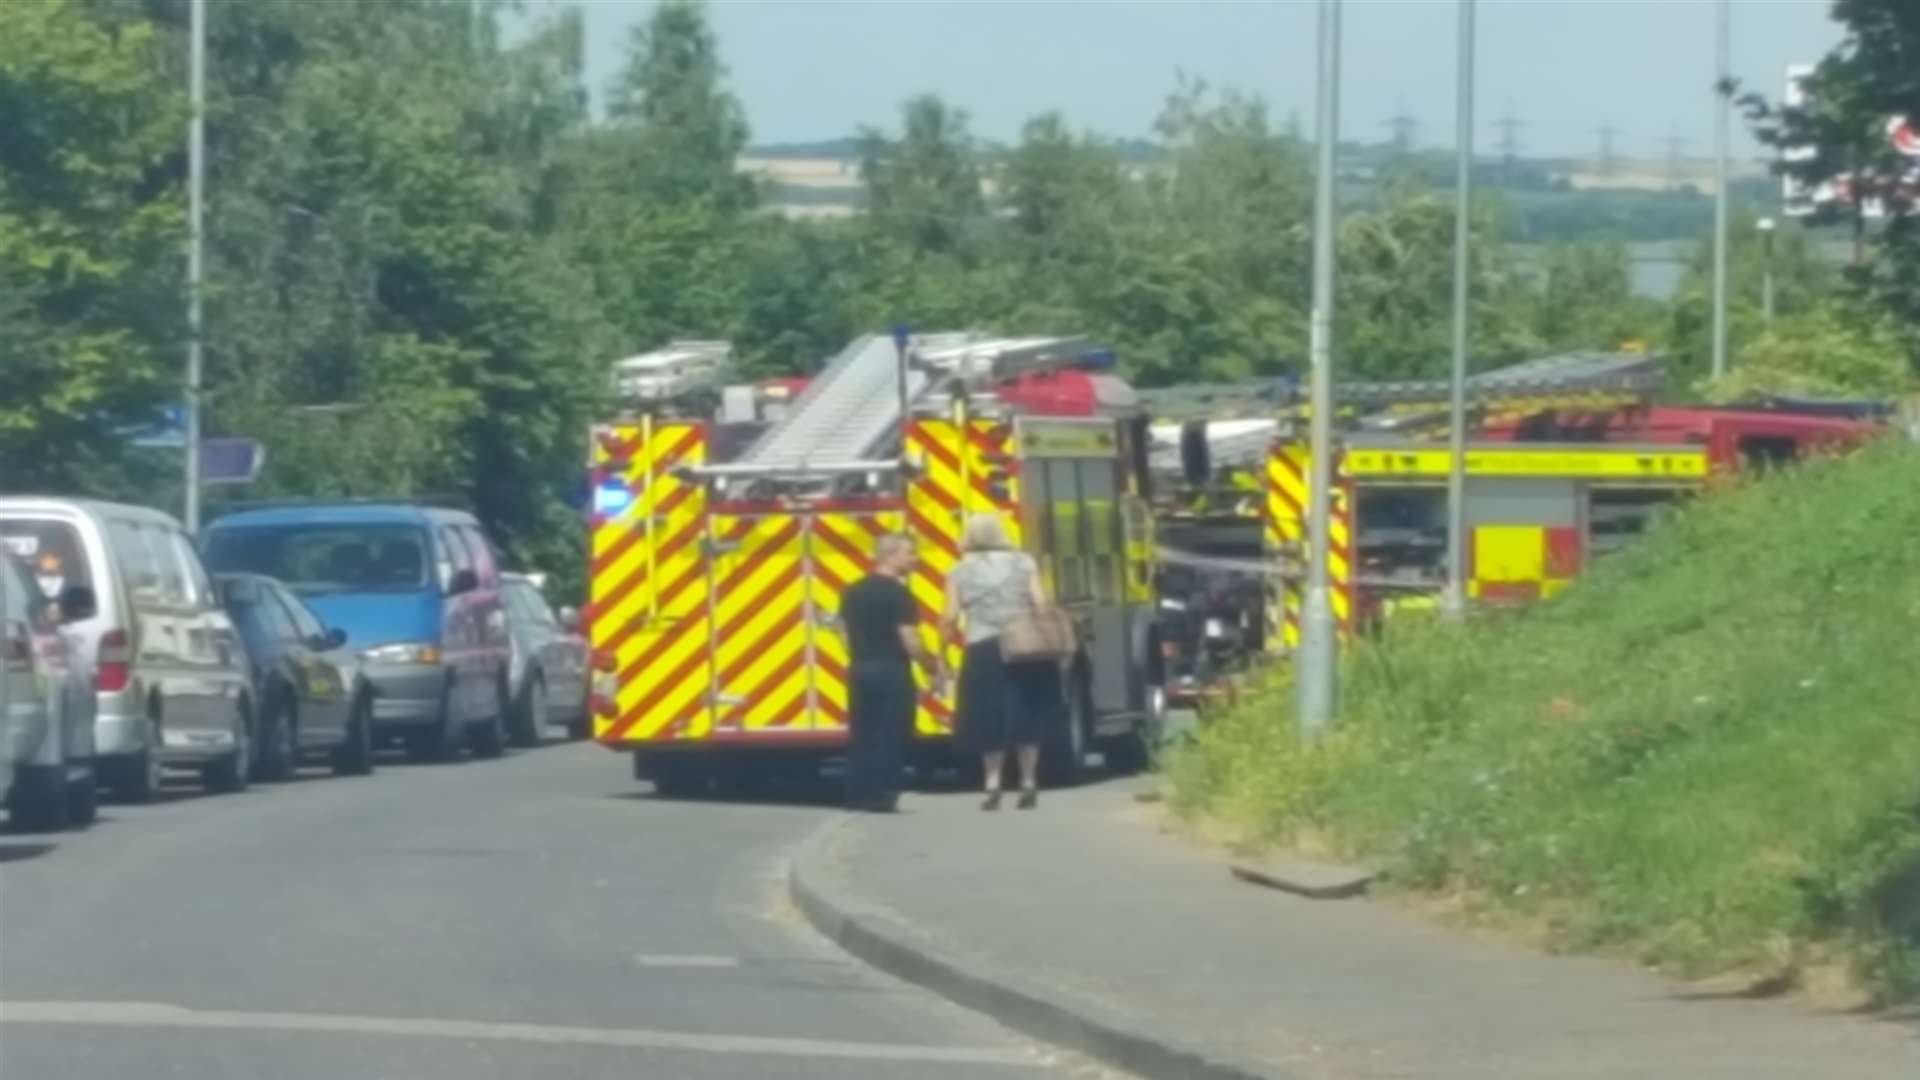 Firefighters used cutting equipment to free the woman from her vehicle